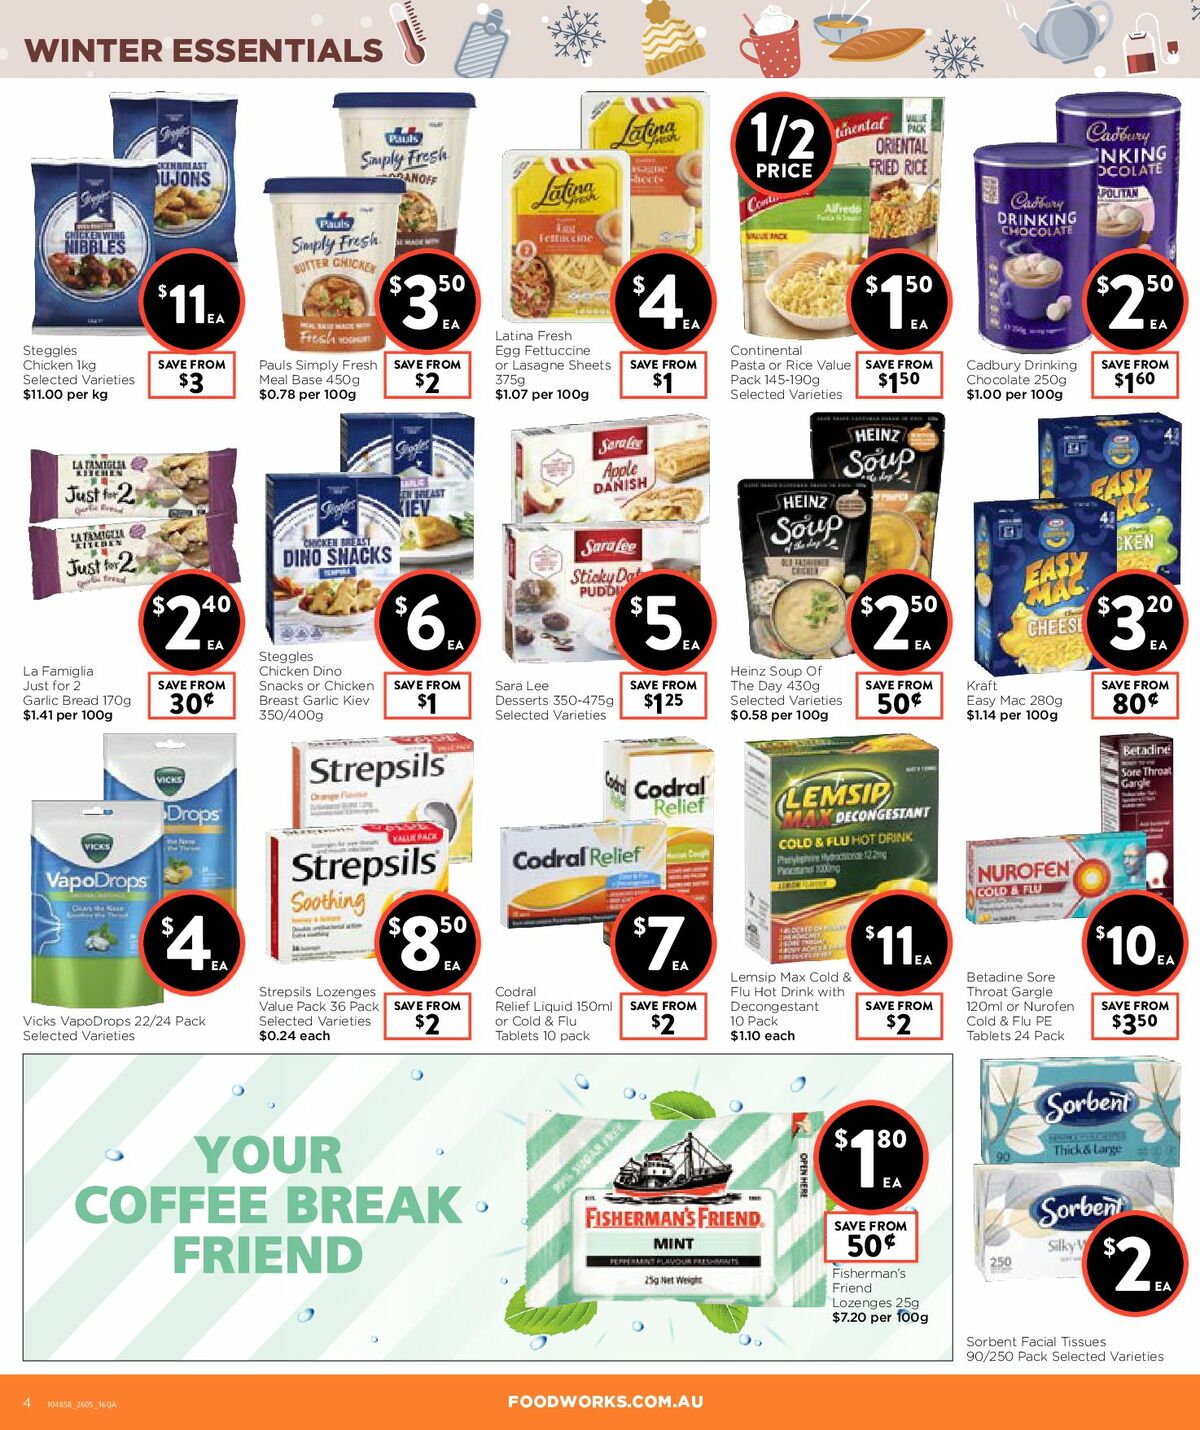 FoodWorks Supermarket Catalogues from 26 May